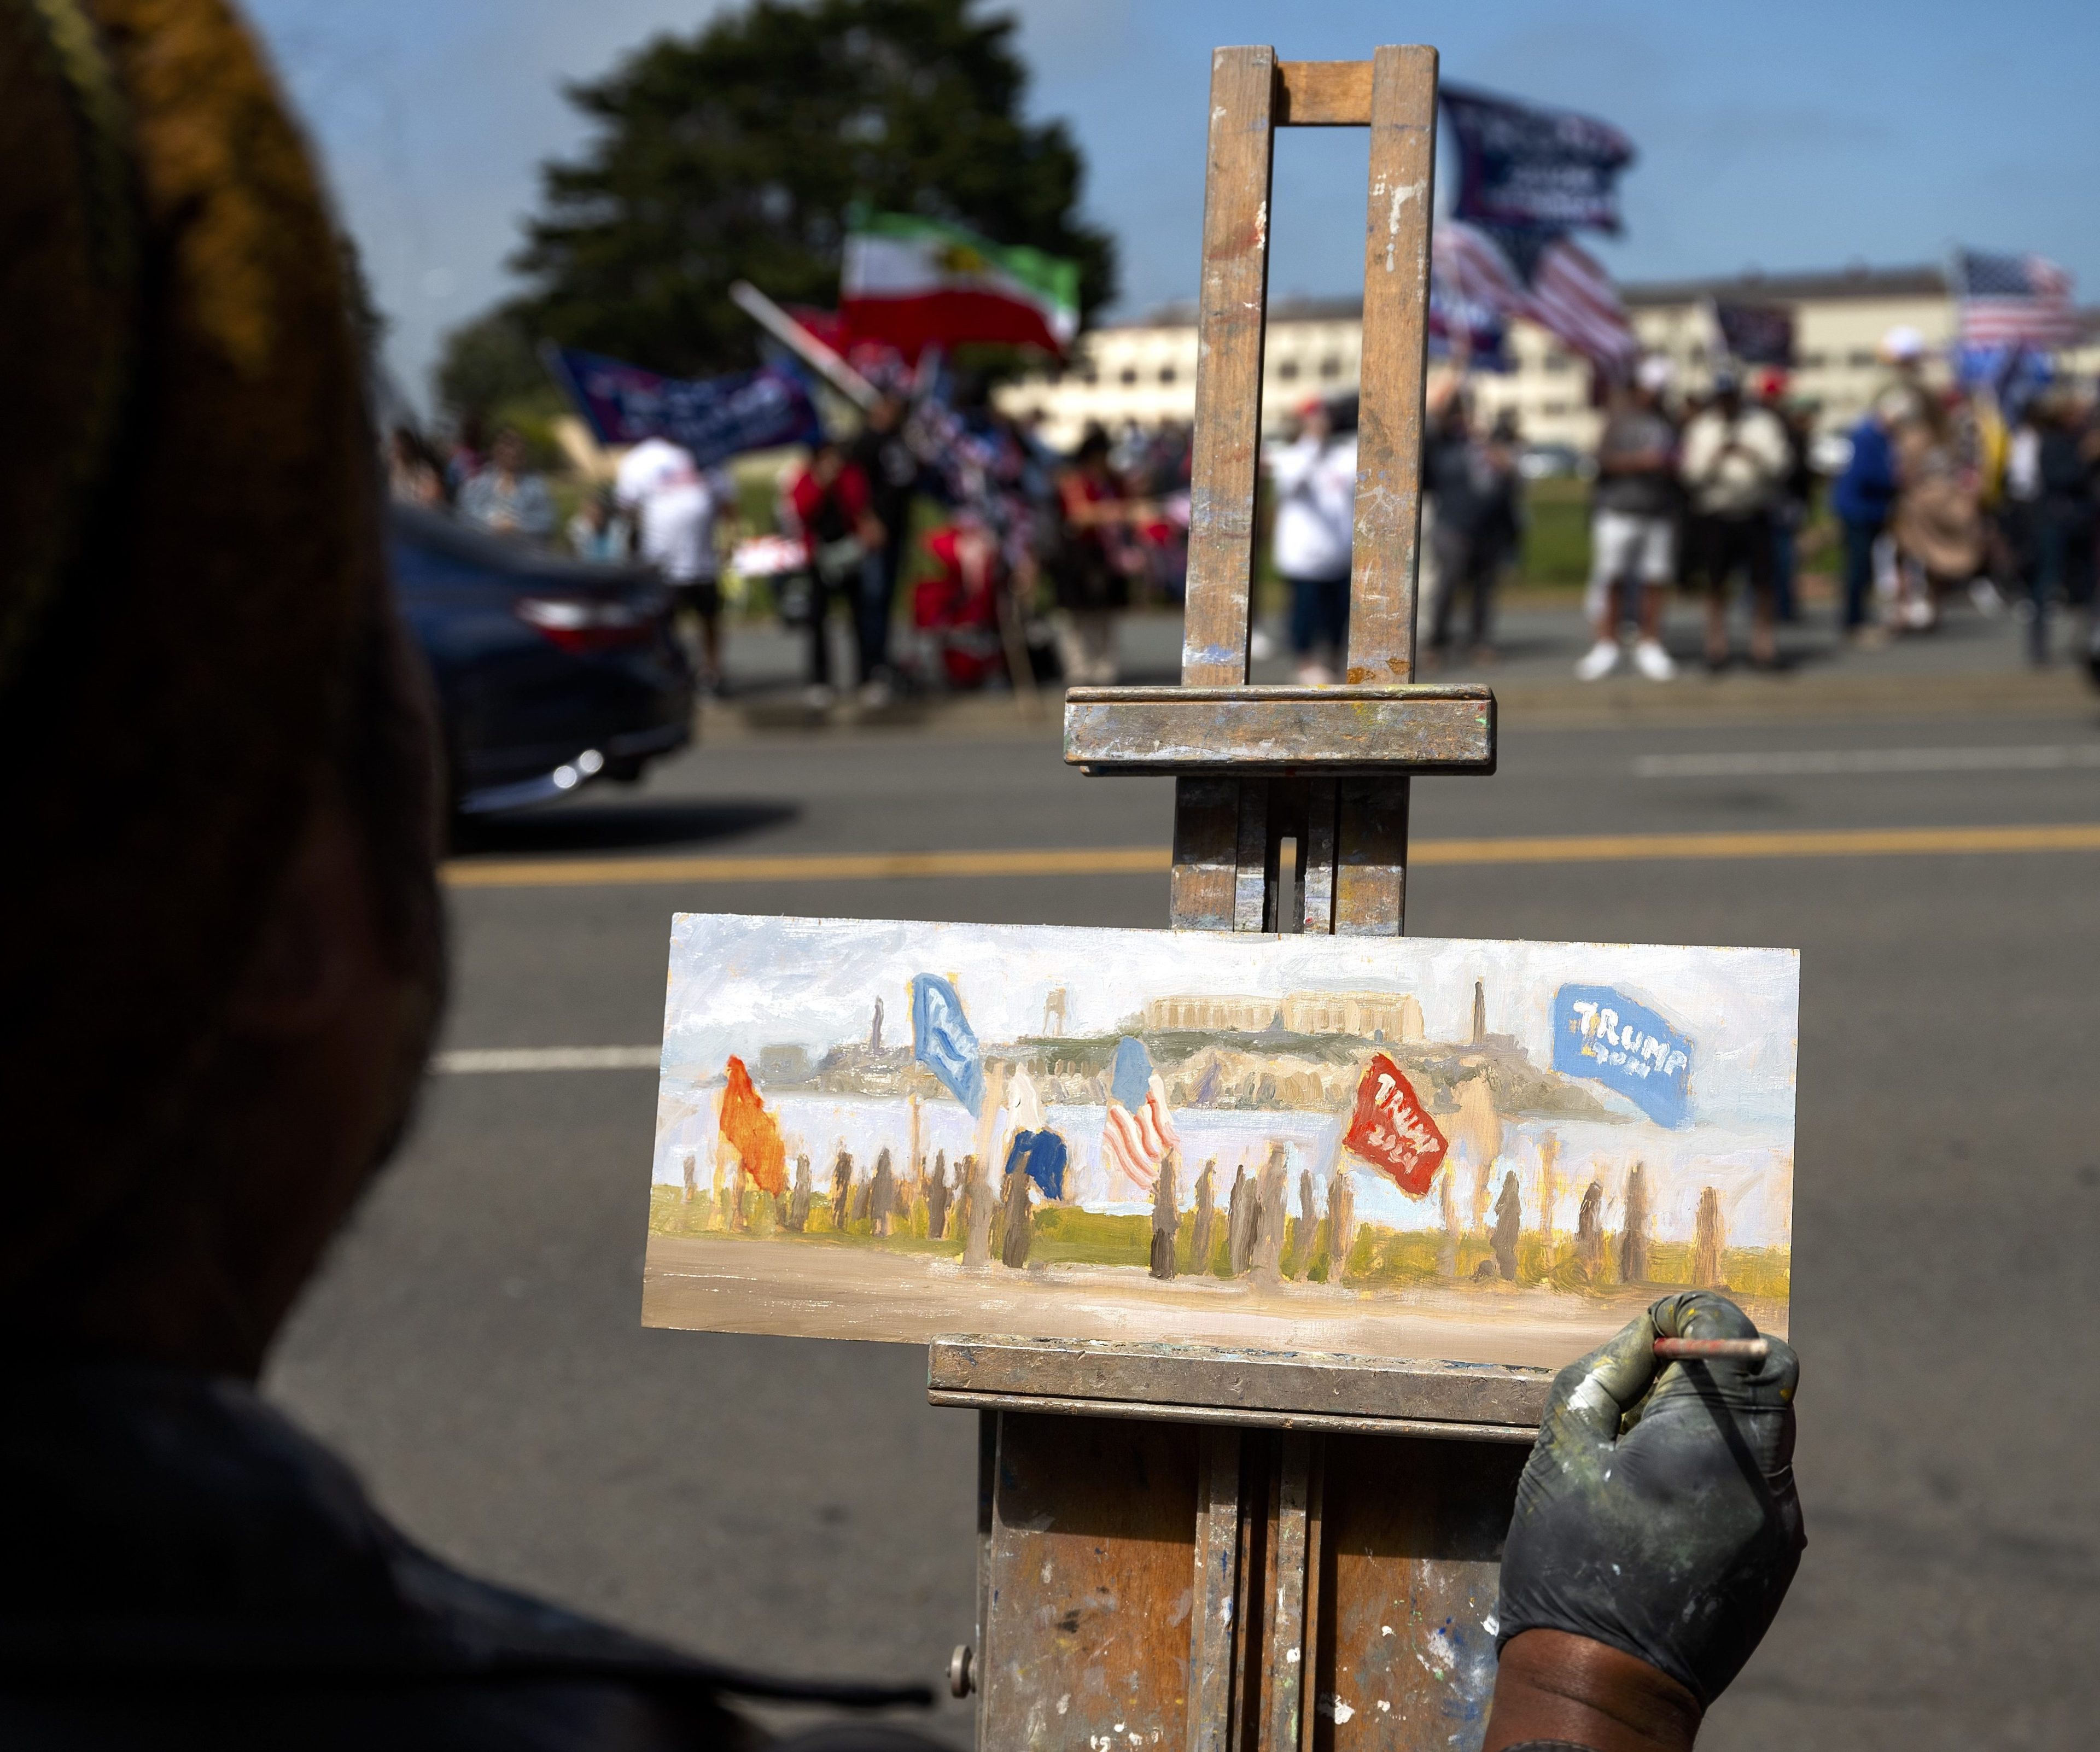 In the image, an artist paints a scene of a political rally, depicting people with flags, including &quot;Trump&quot; flags and an American flag, on a standing easel.